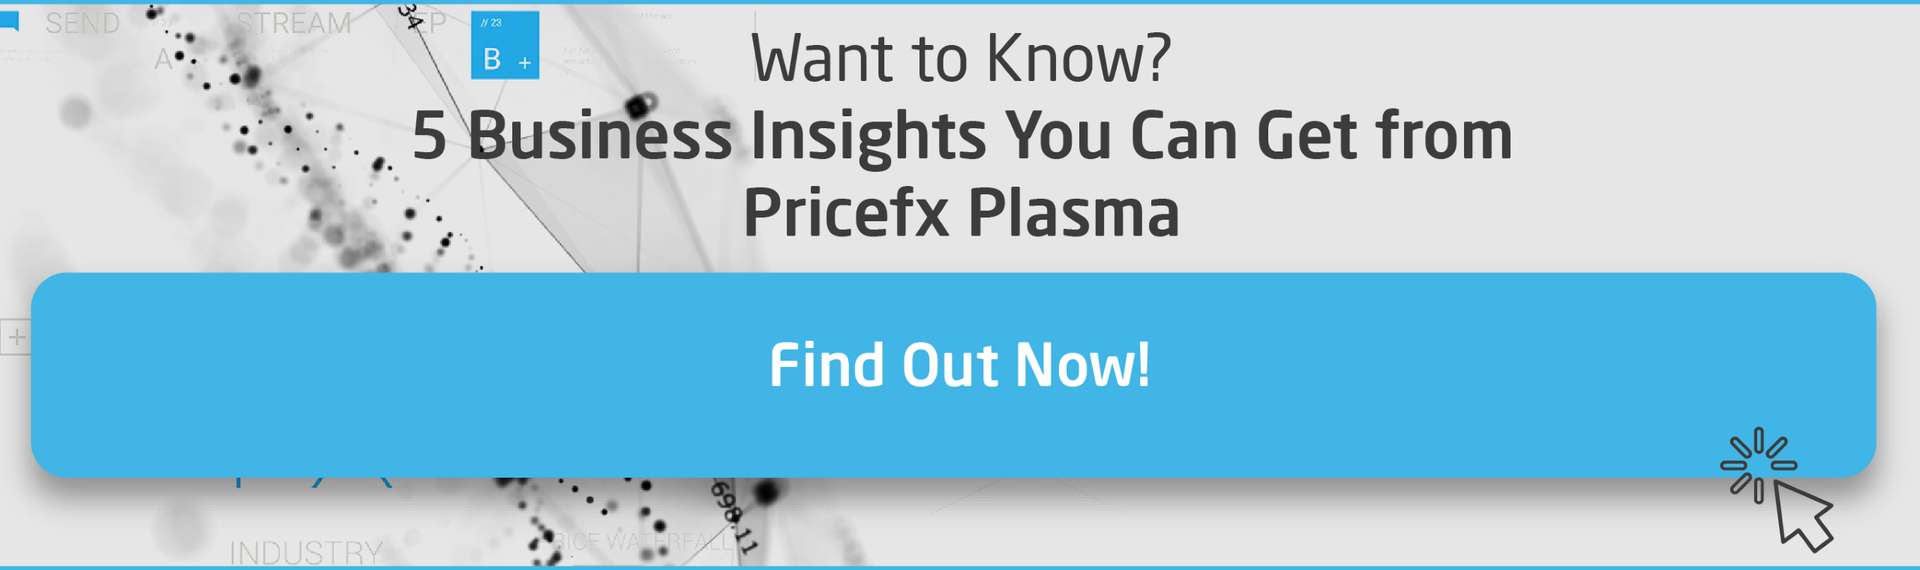 CTA-5-Business-Insights-You-Can-Get-From-Pricefx-Plasma